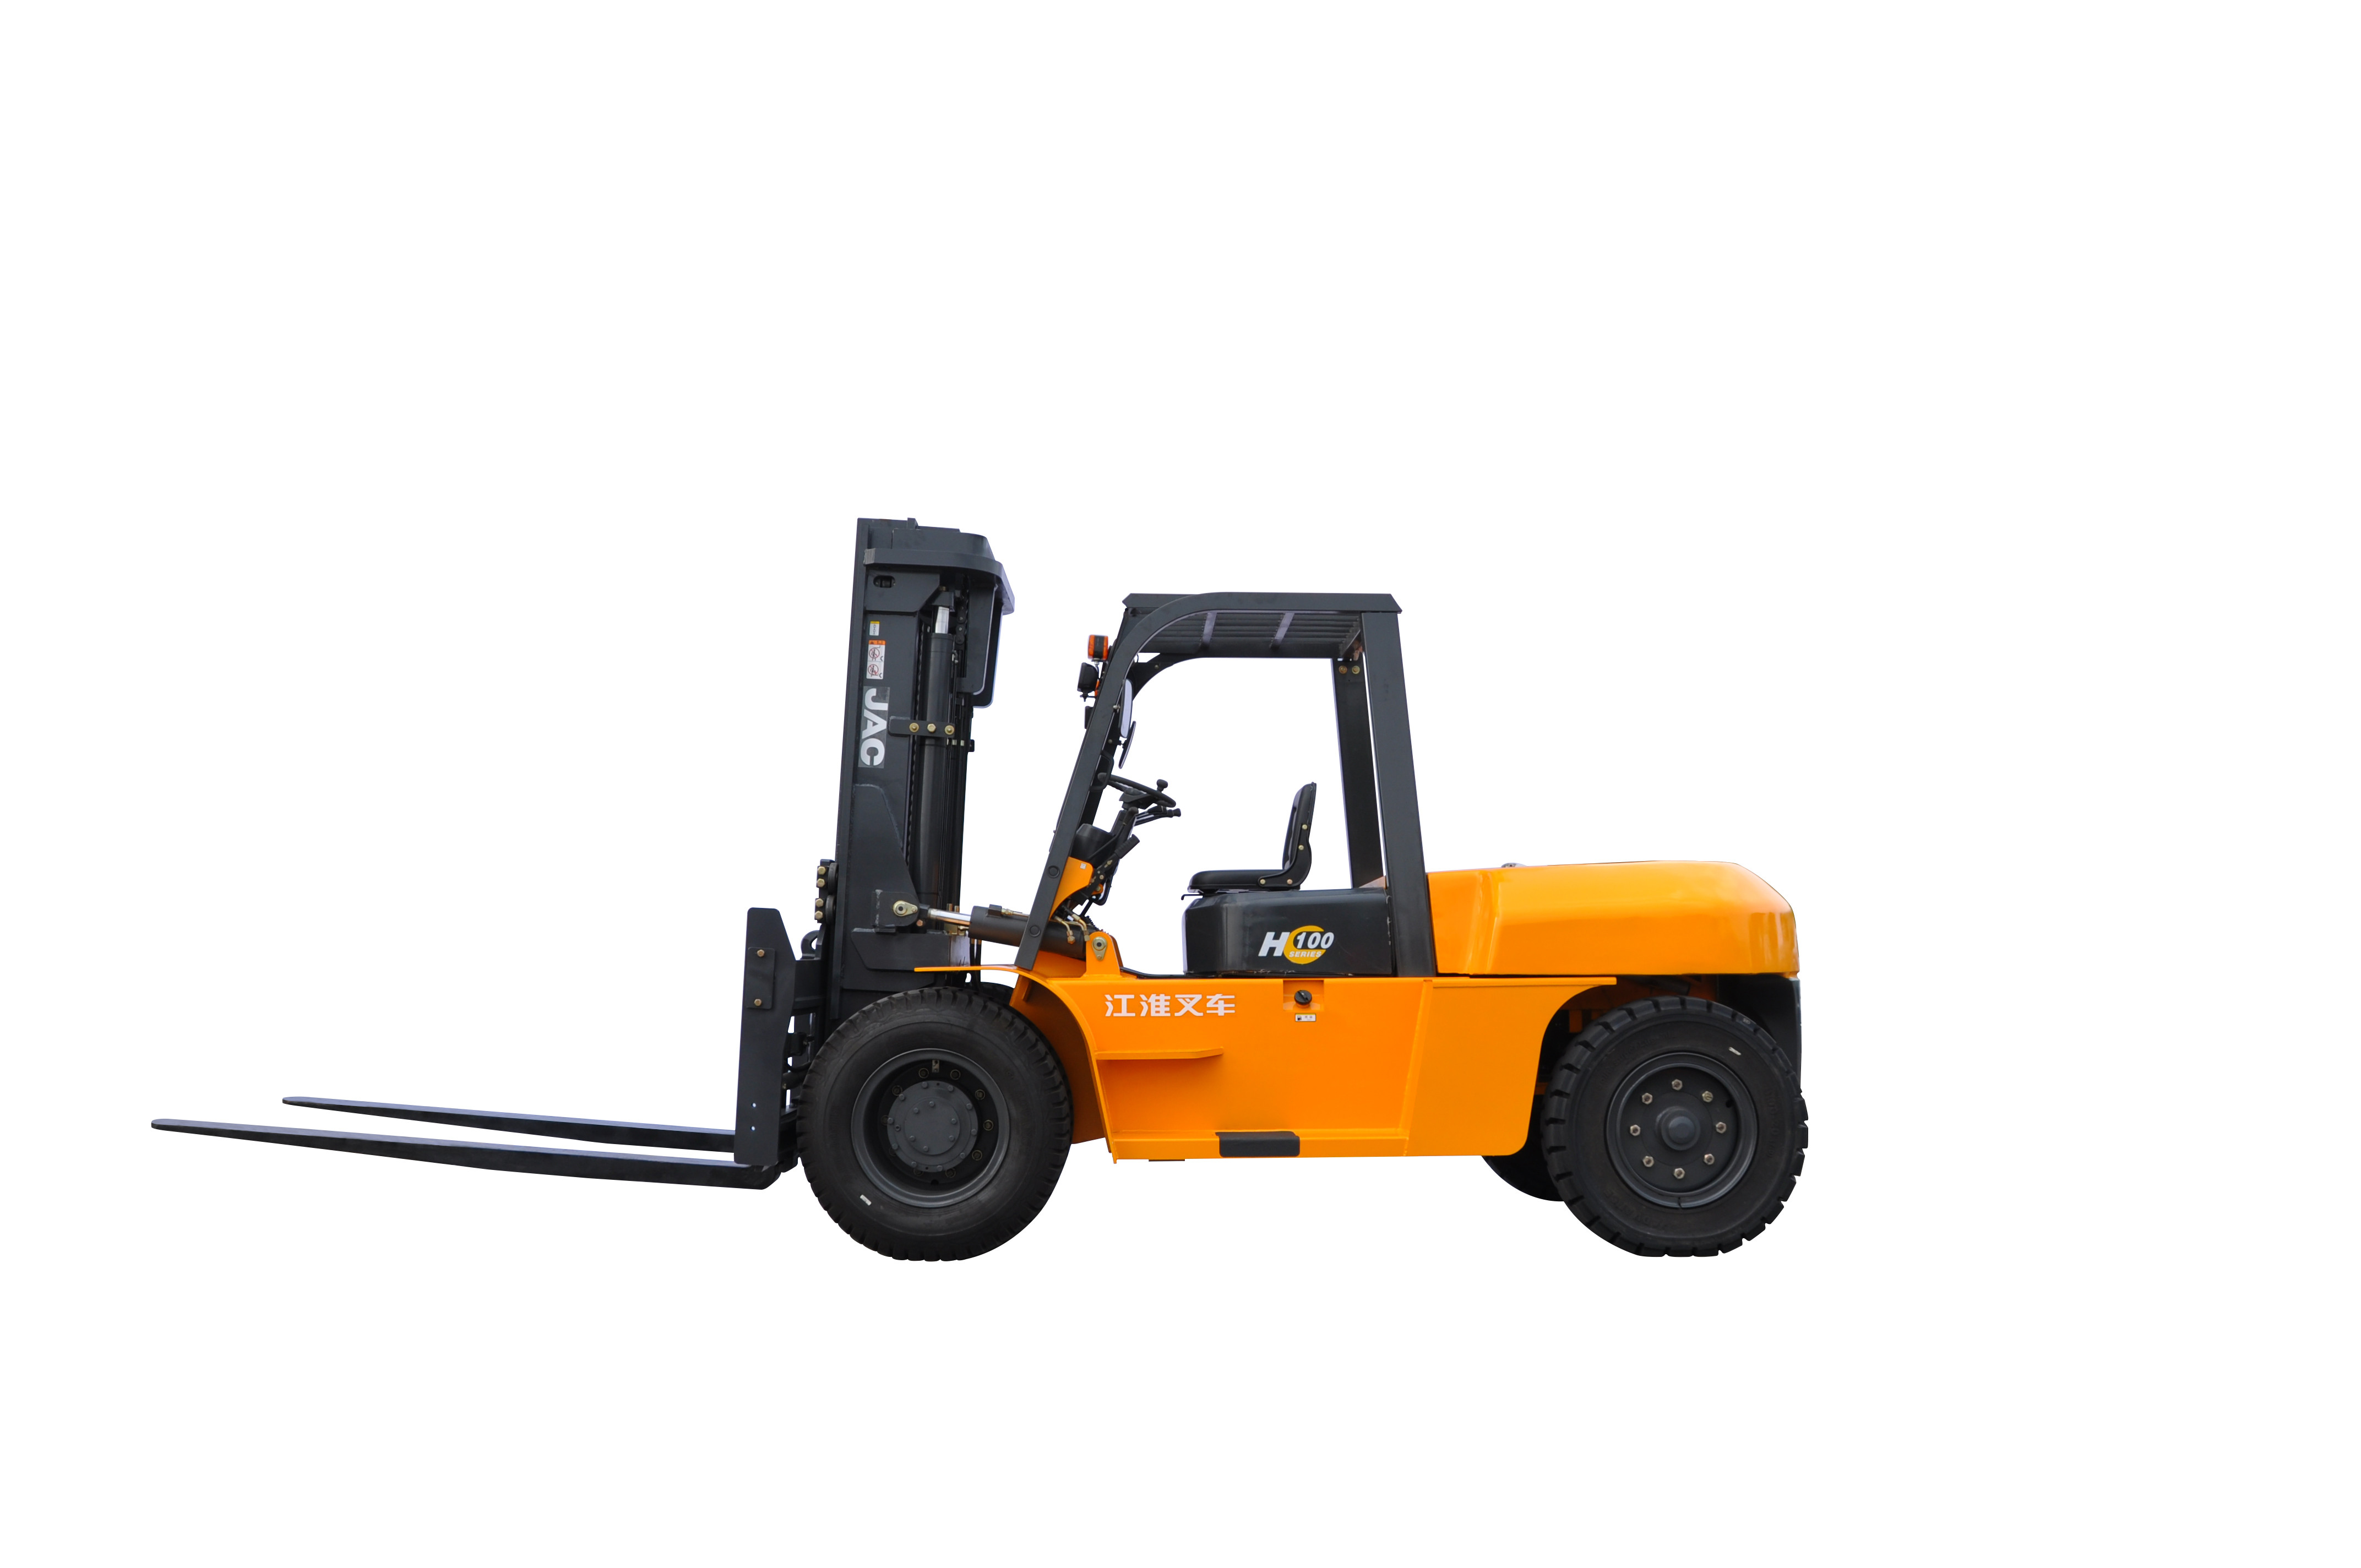 Small Turning Radius 10 Ton Forklift , Large Capacity Industrial Counterbalance Forklifts Heavy Equipment Forklift